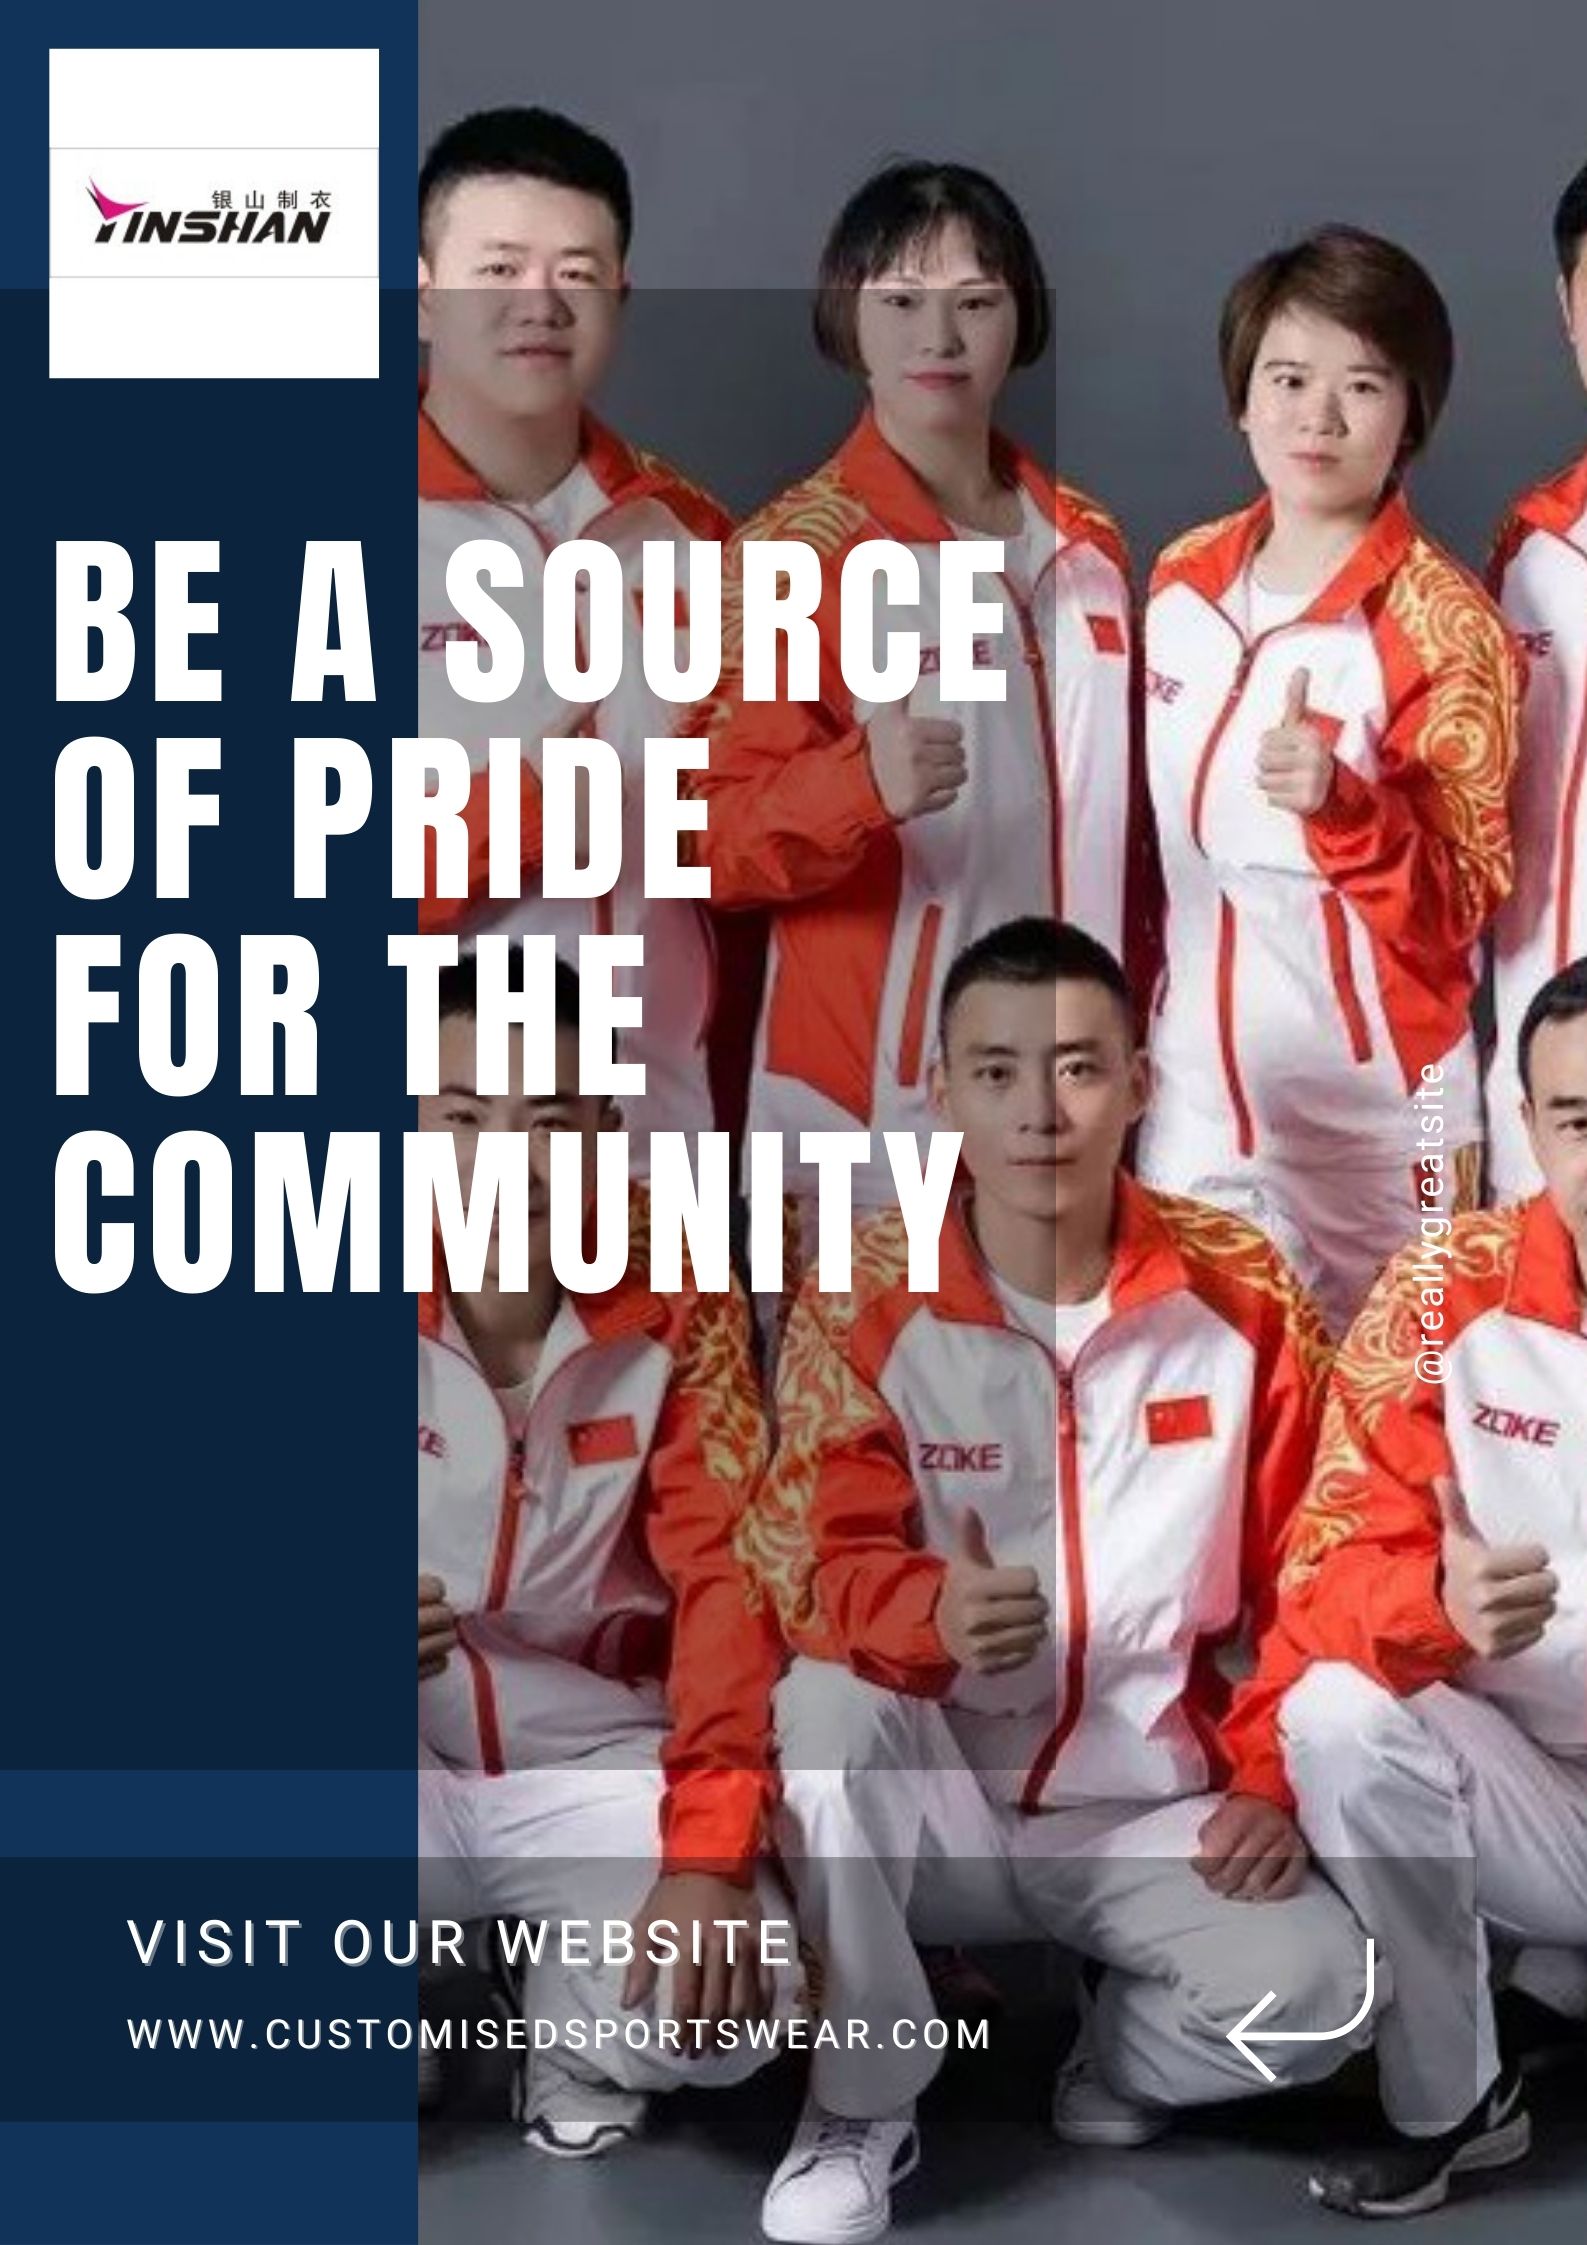 Be a source of pride for the community